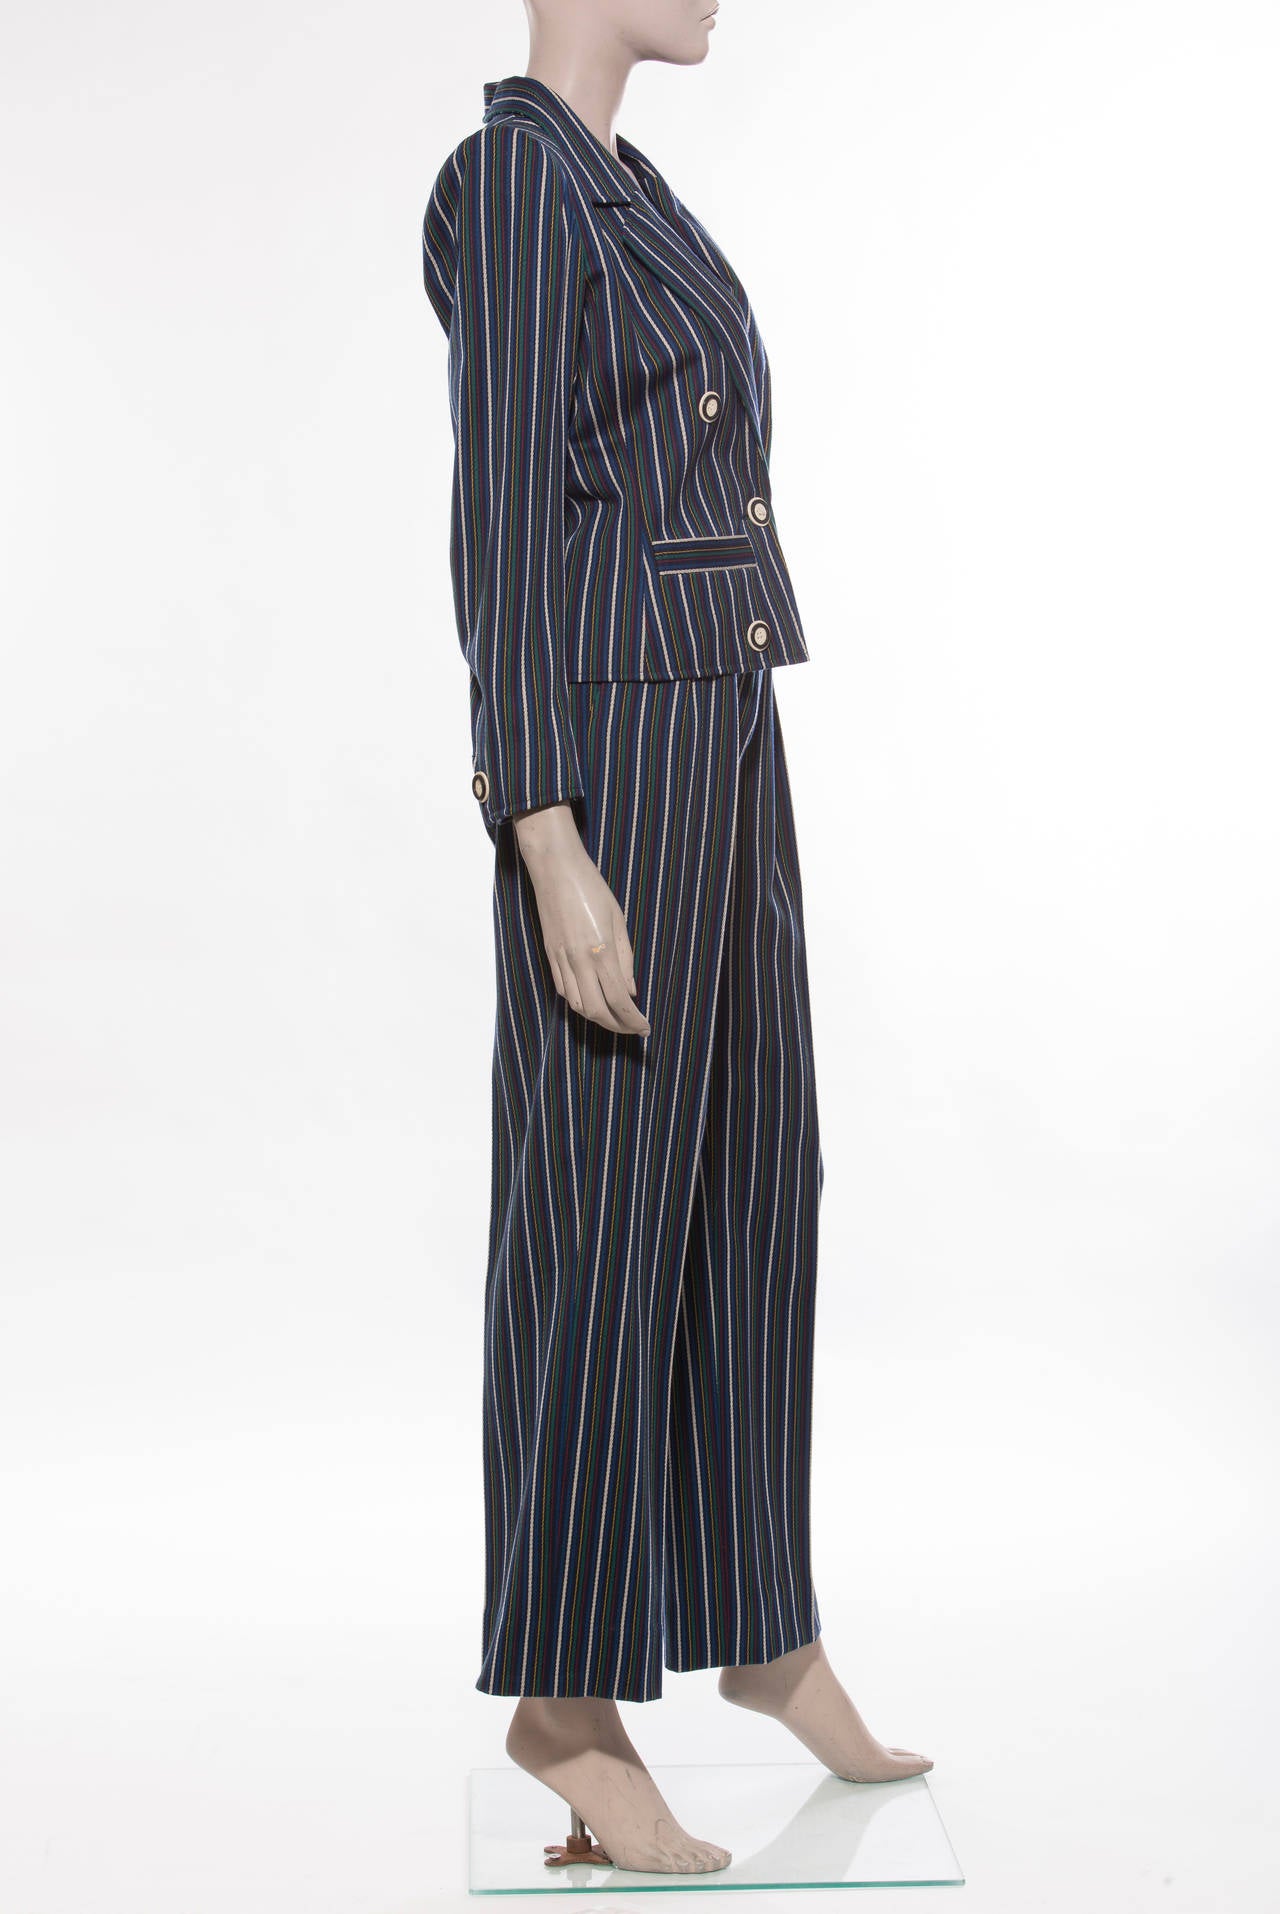 Yves Saint Laurent, circa 1980's, unlabeled navy blue, wool, double breasted pinstripe pant suit.